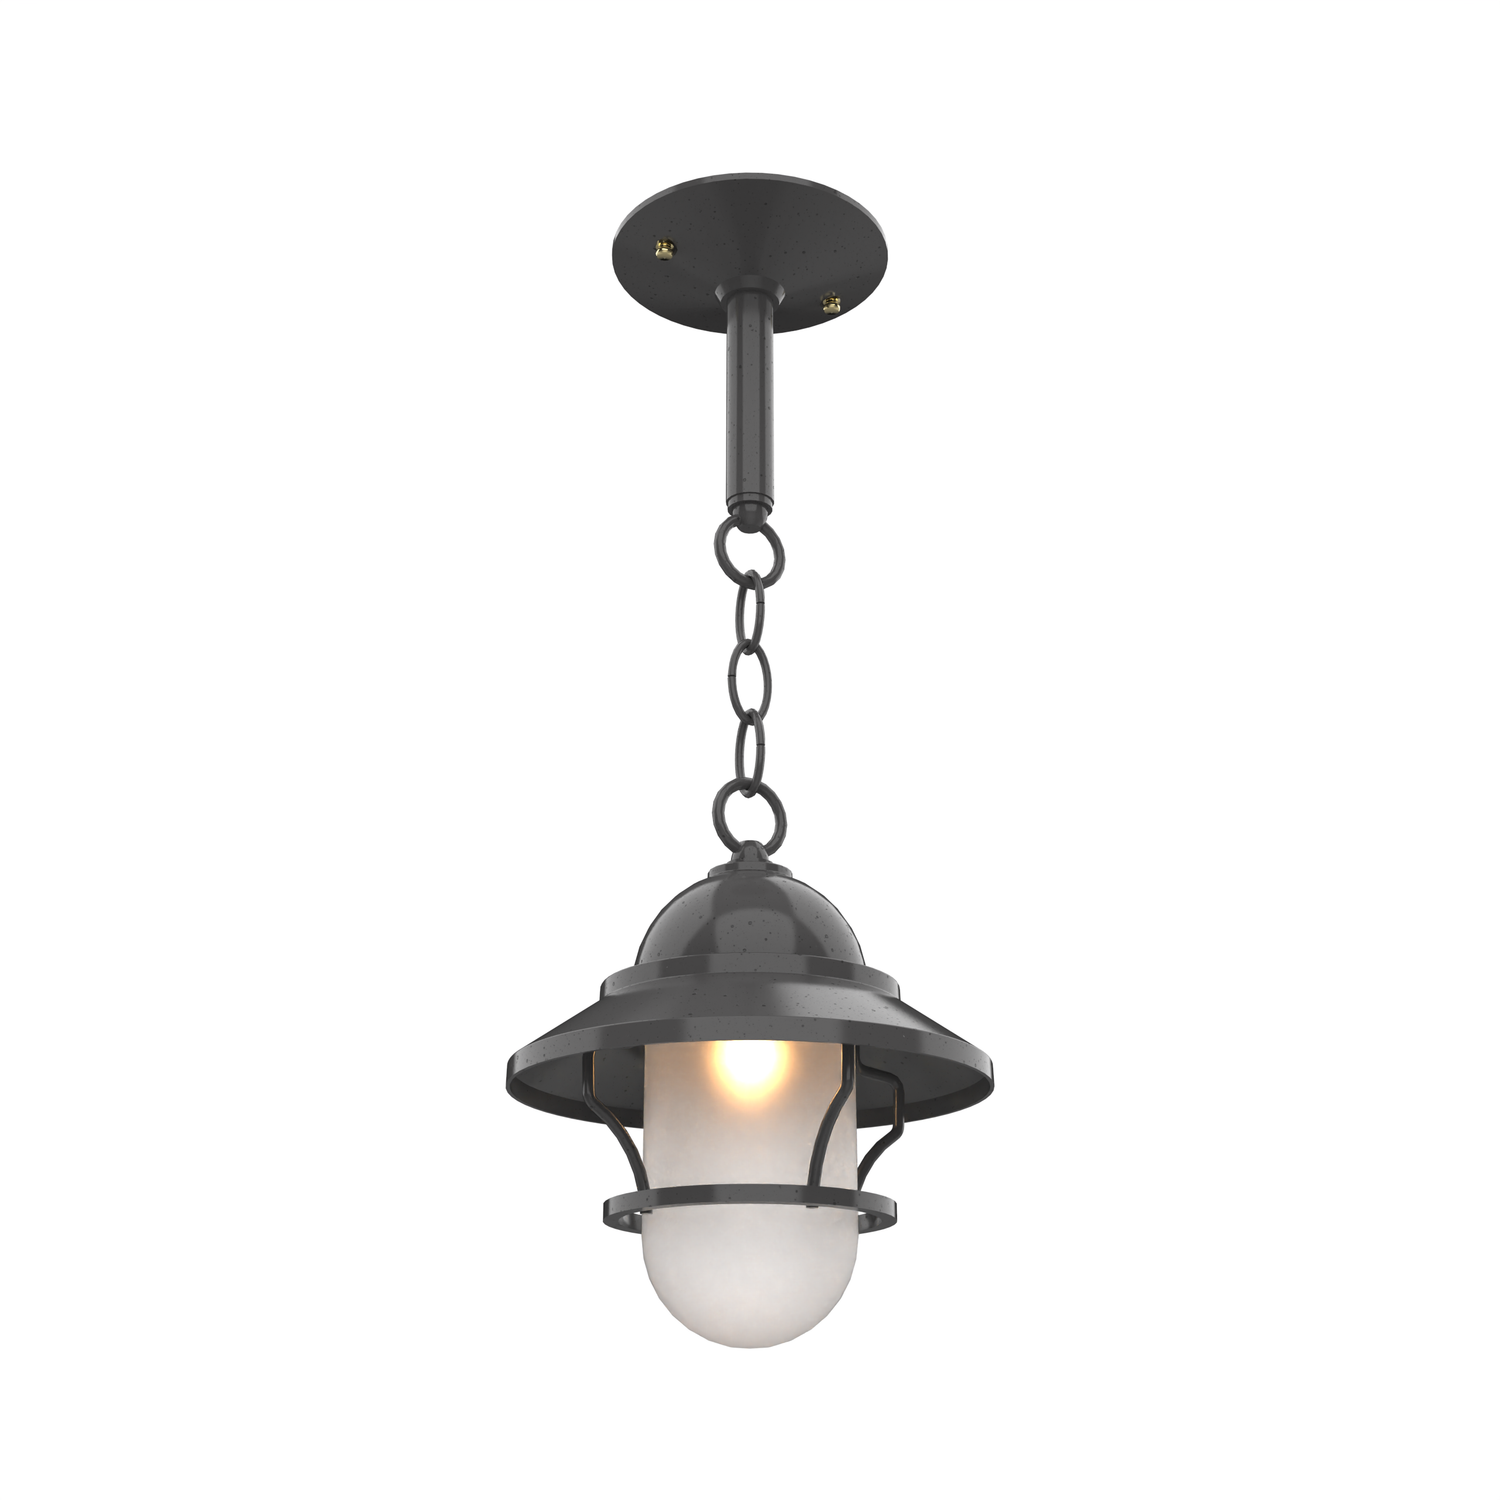 San Francisco - Chain ceiling mount with globe and small grid - 12250